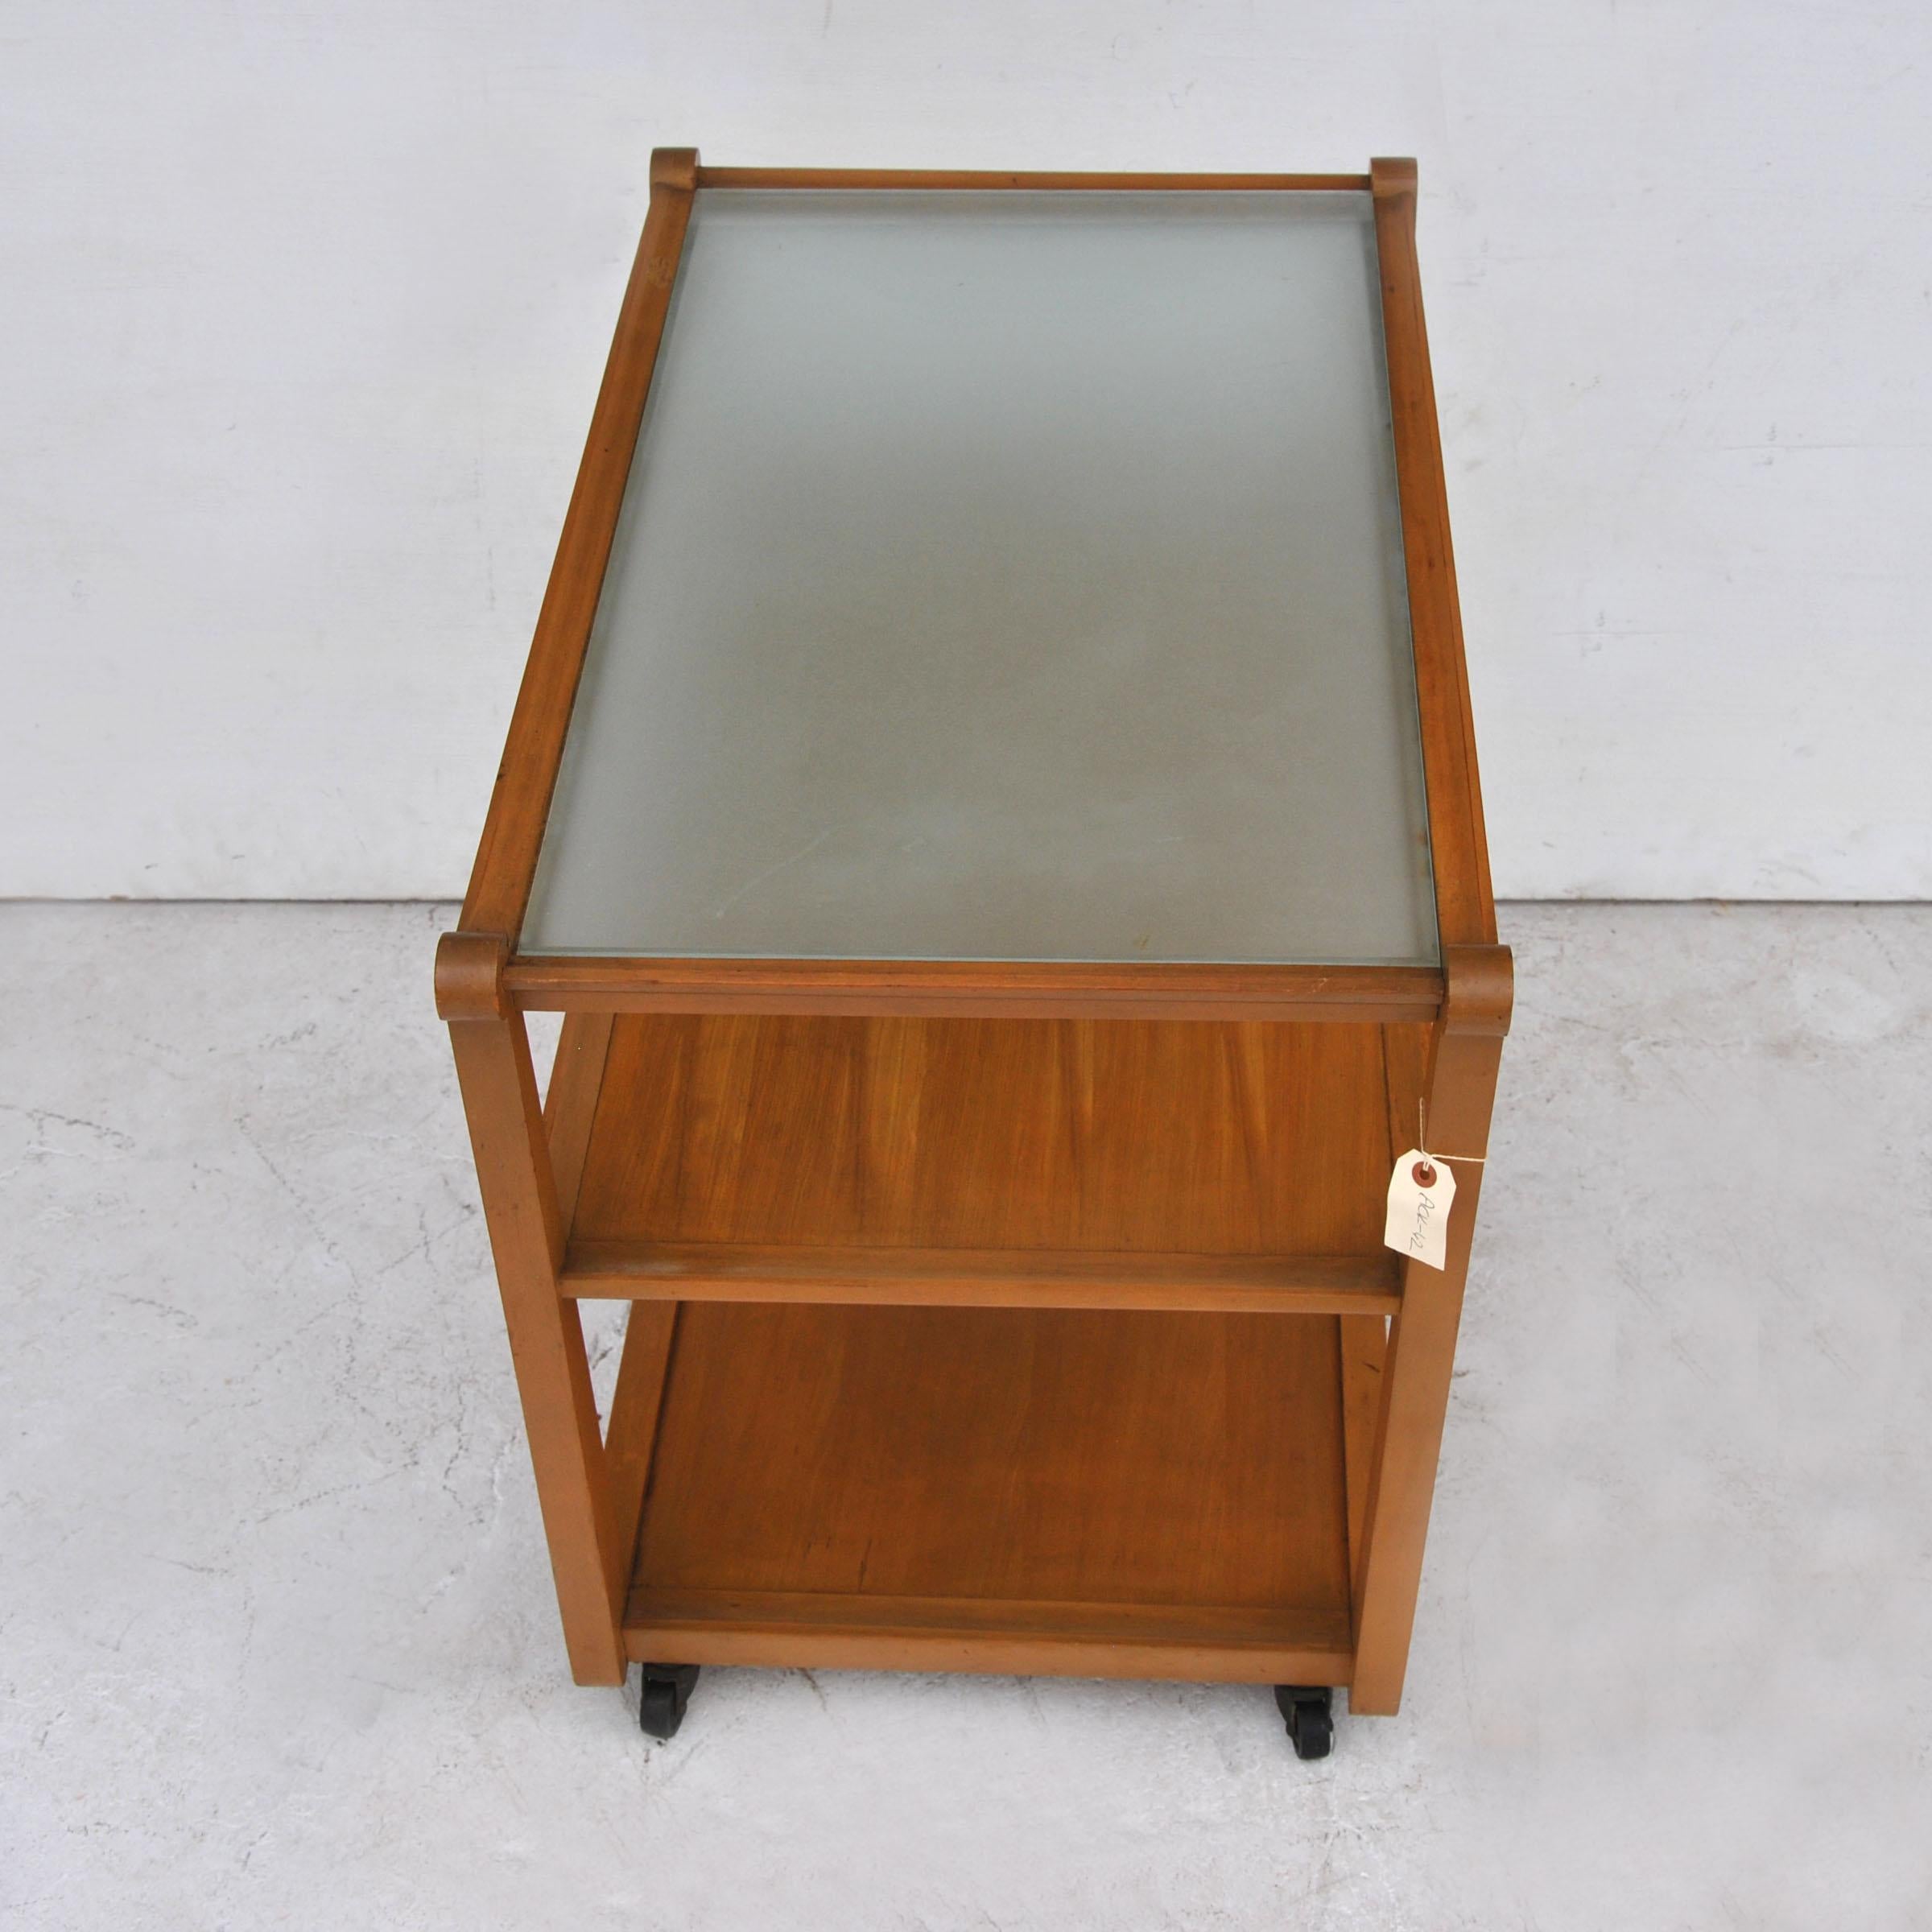 Mid-20th Century Edward Wormley for Drexel Precedent Rolling Bar Cart   For Sale